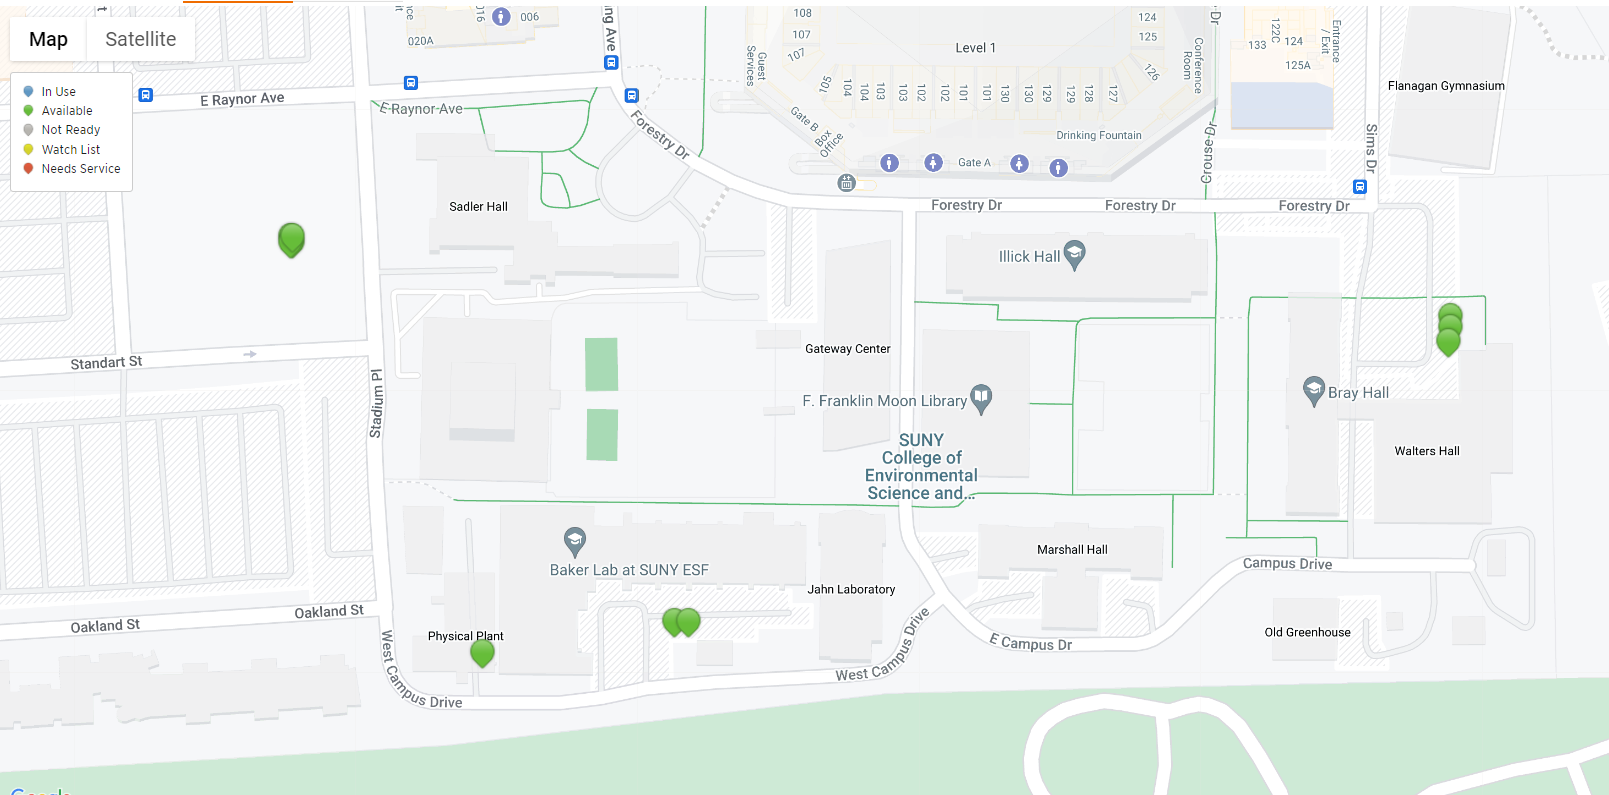 ev charging map - 4 stations in Lot P22 (public) and 6 by campus buildings (permit only)